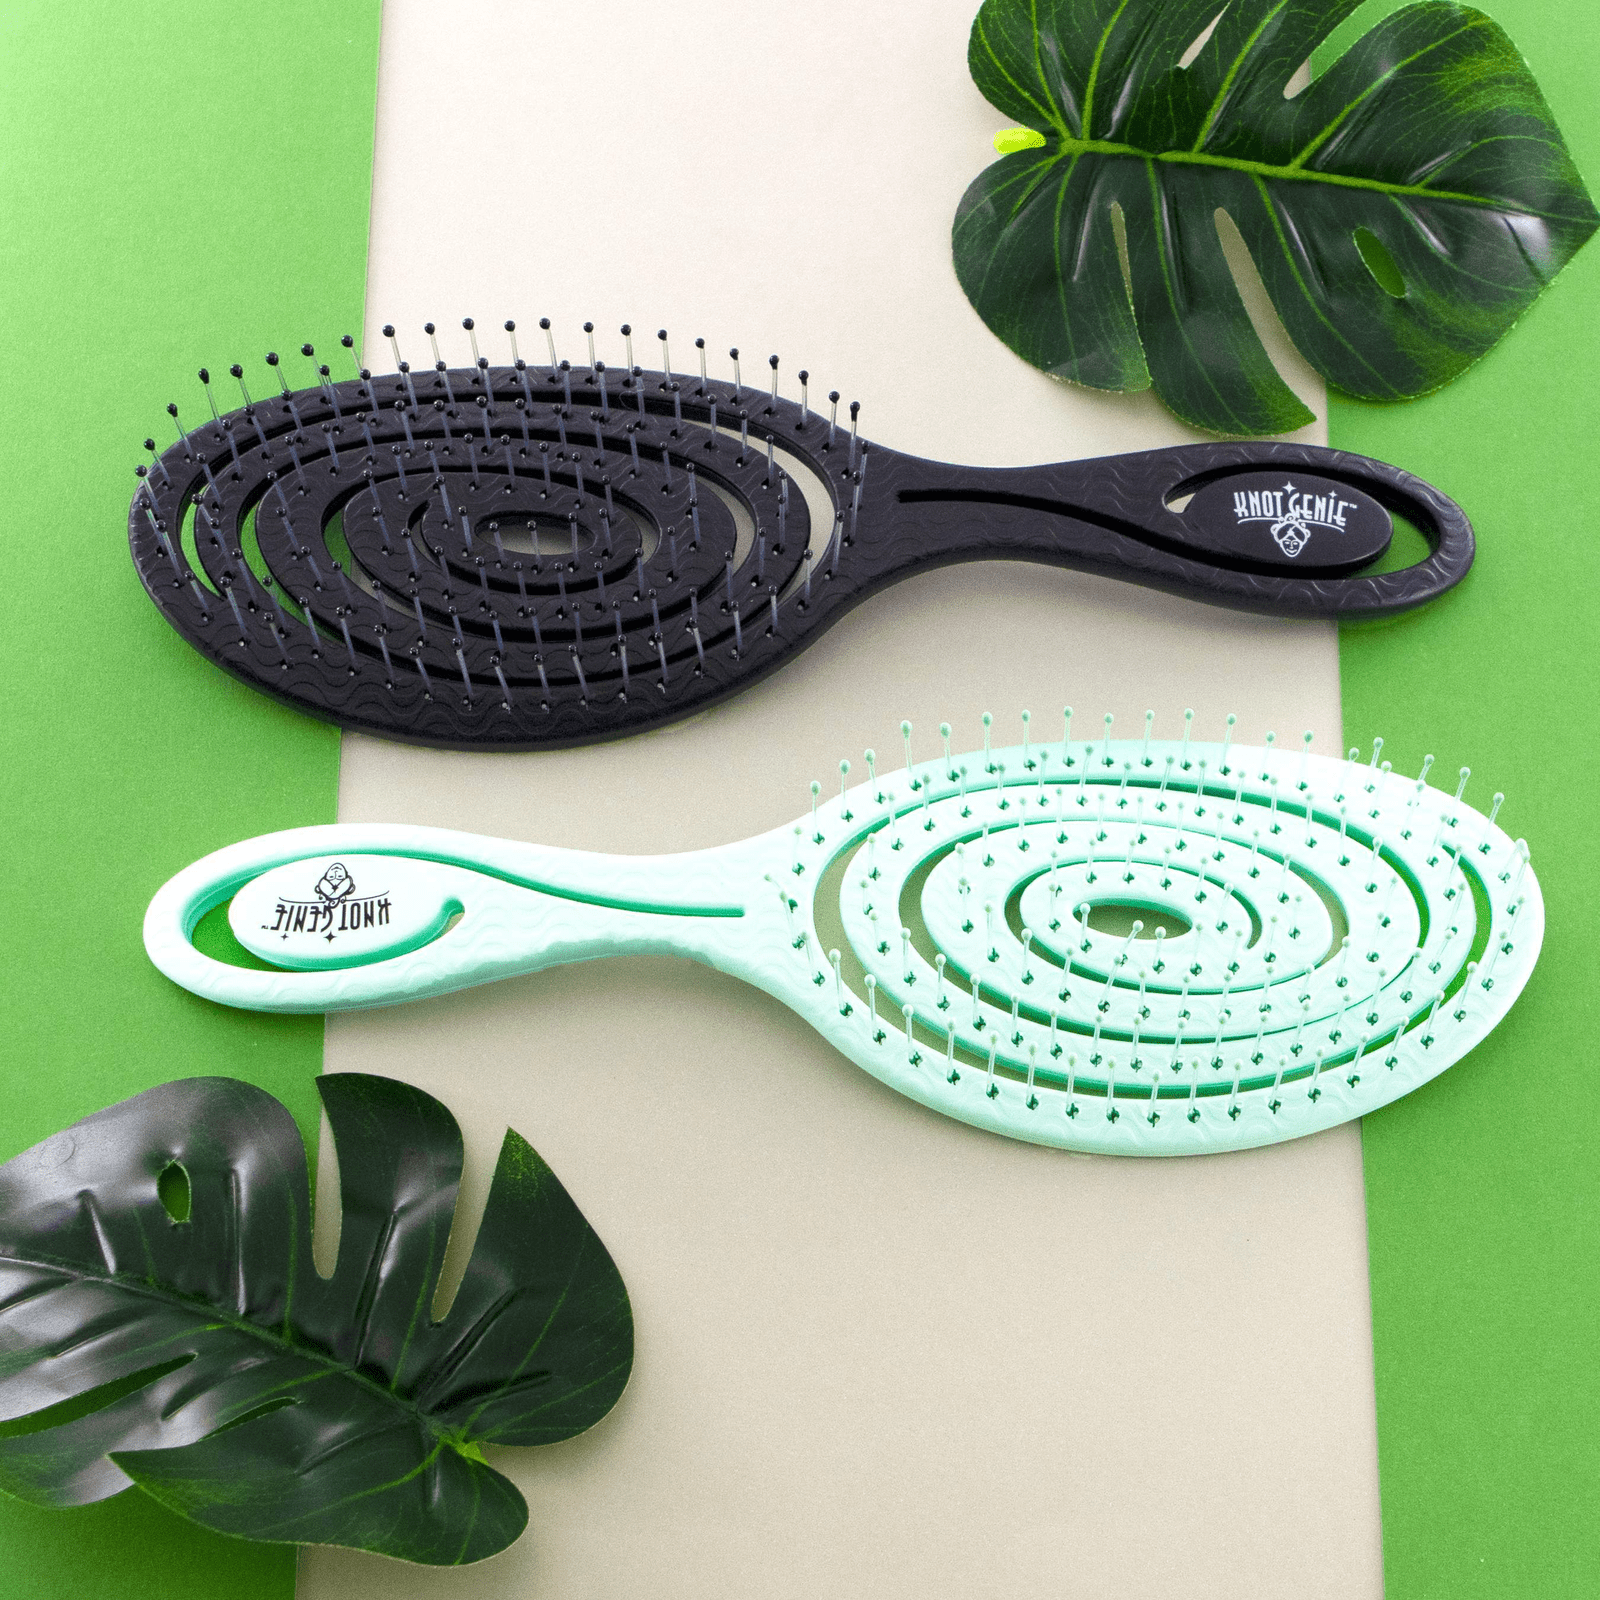 Knot Genie Mother Earth Eco Friendly Detangling Brush-Knot Genie-Brand_Knot Genie,Collection_Hair,Collection_Tools and Brushes,FABS_Friday2022,KNOT_Mother Earth Detangler,Tool_Brushes,Tool_Detangling Brush,Tool_Hair Tools,Tool_Vented Brushes